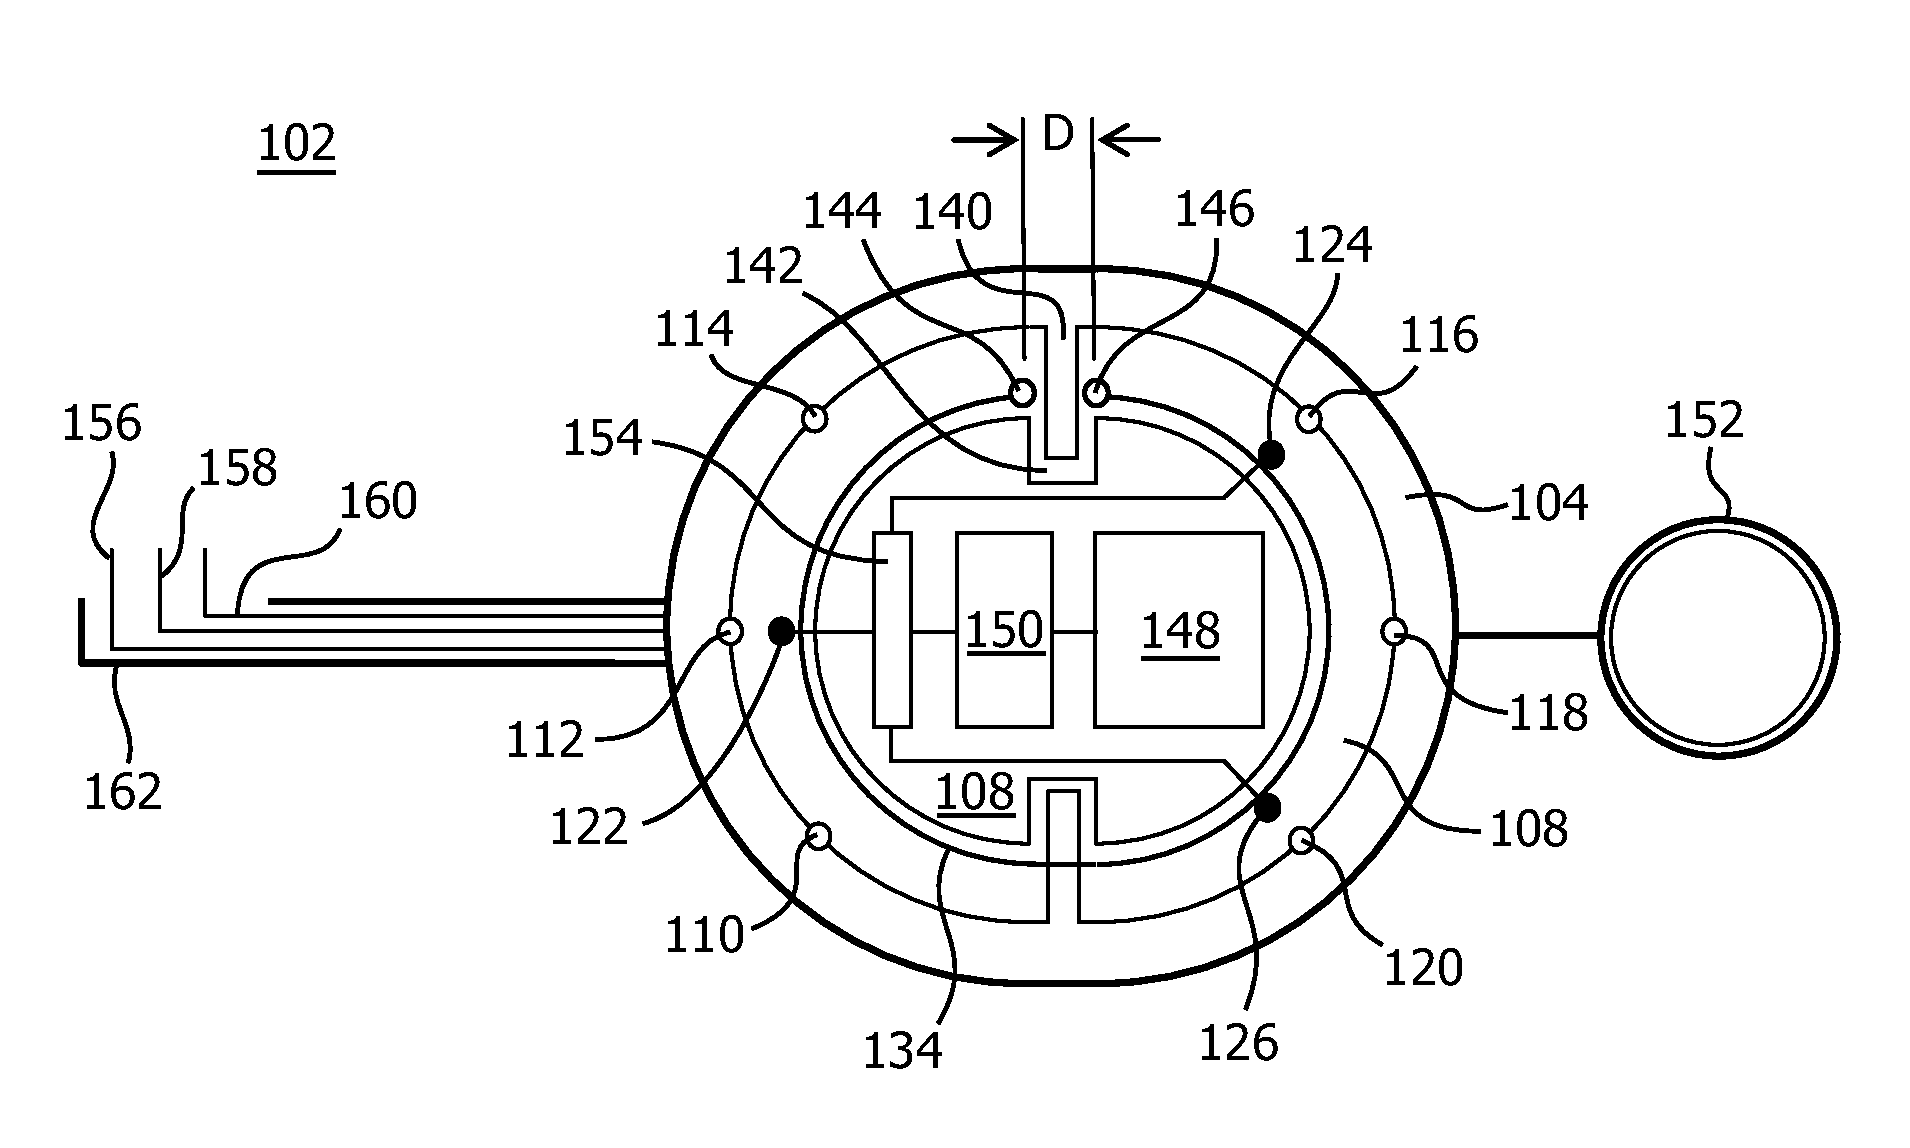 System Comprising a Box for Implanting in a Body Part